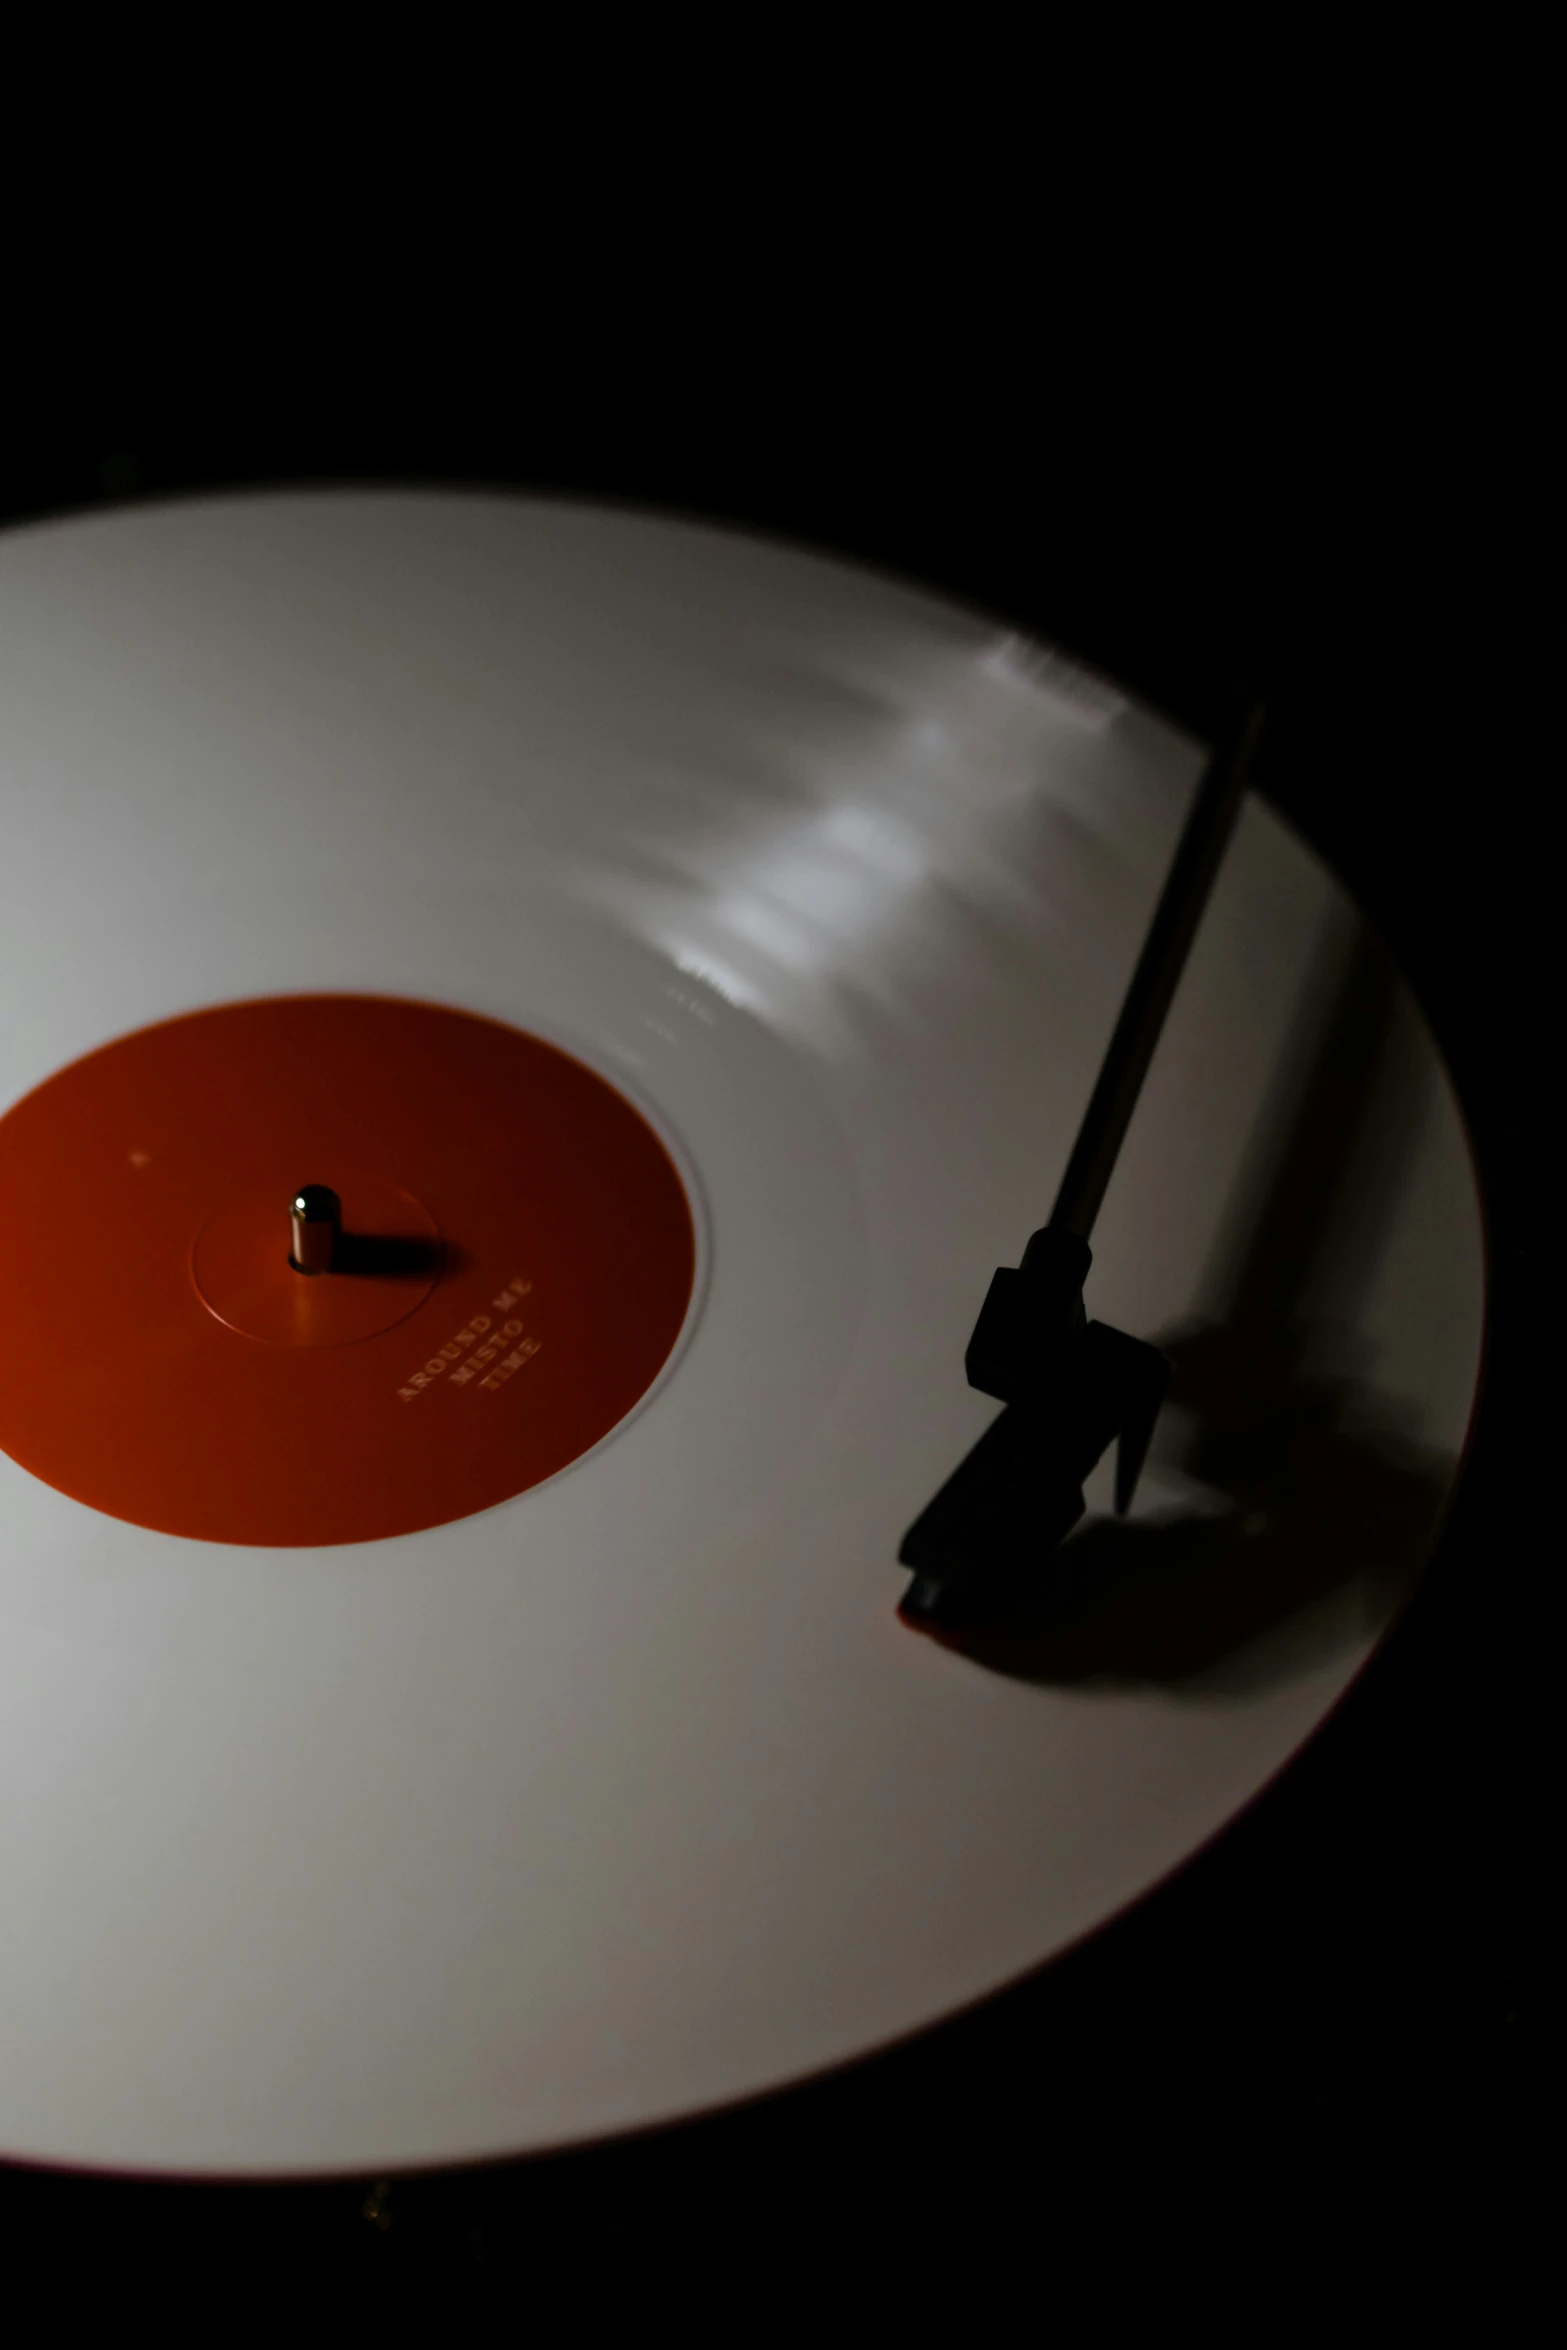 a single vinyl disc laying on the table with the cover opened